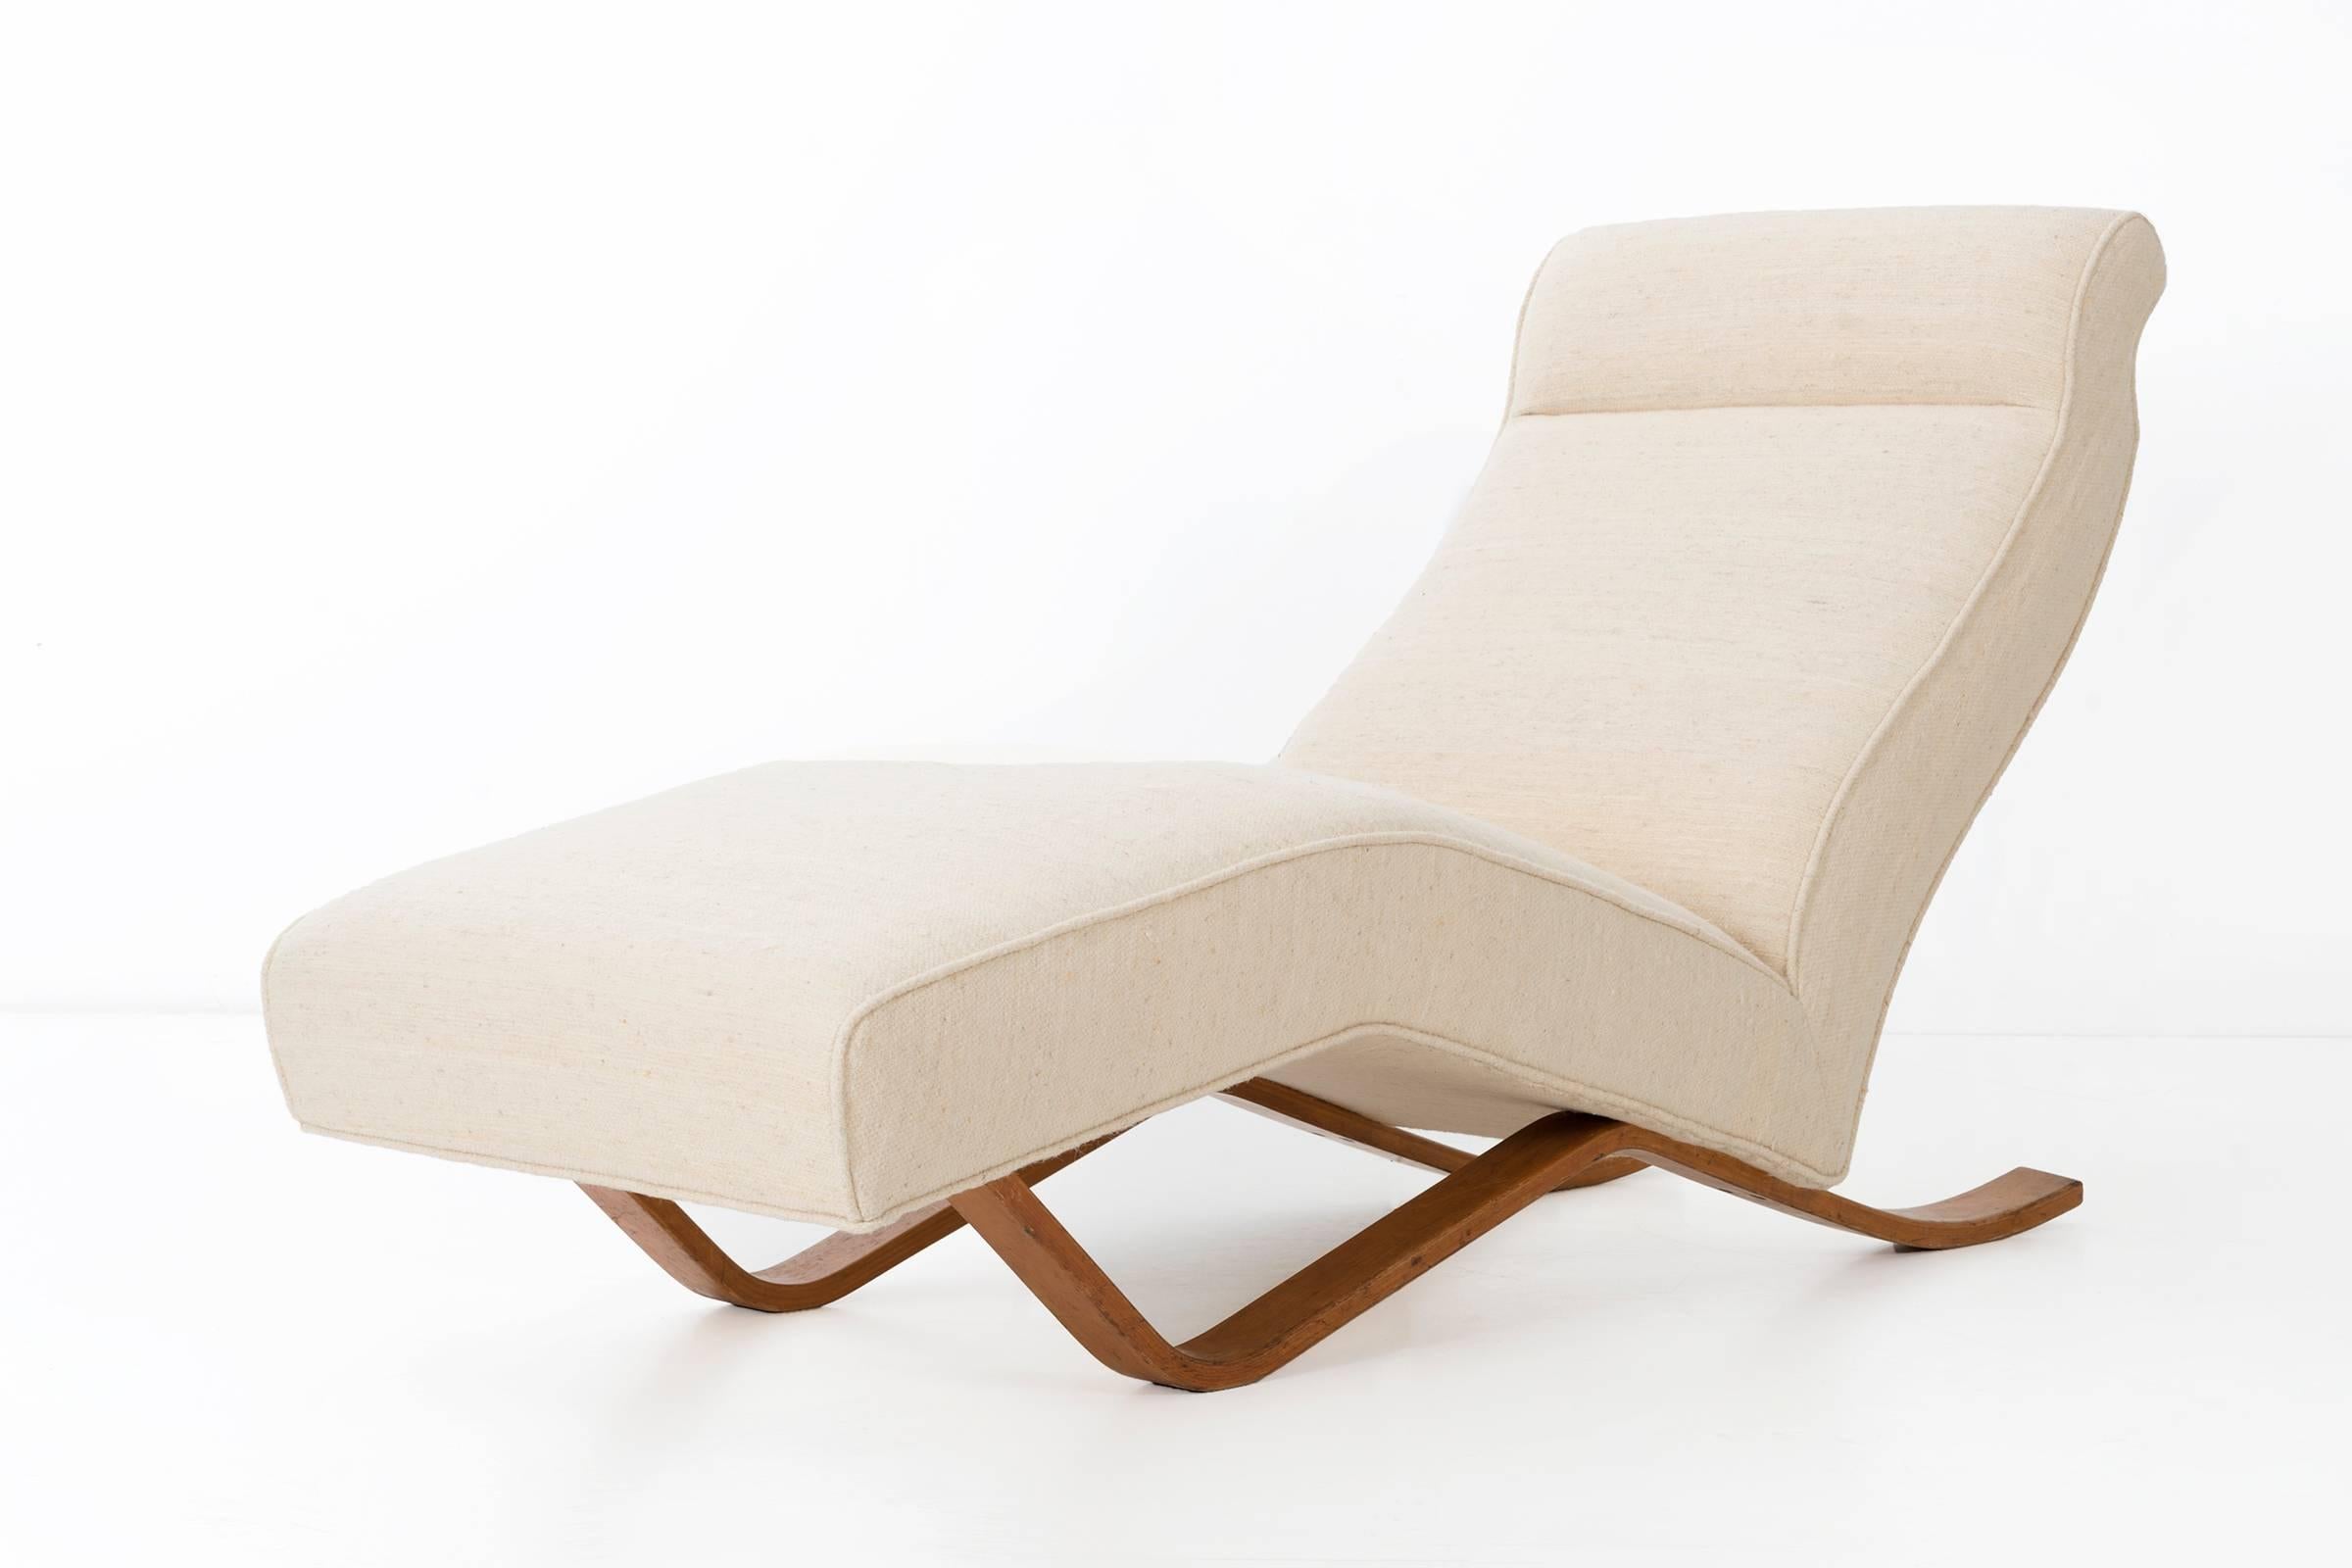 Carl Anderson and Ross Bellah chaise from the MoMA Organic Design Competition
Anderson and Bellah chaise form received honorable mention in 1941.
Reupholstered with Jack Lenor Larsen vintage fabric.
Original fabric (worn) saved and could be